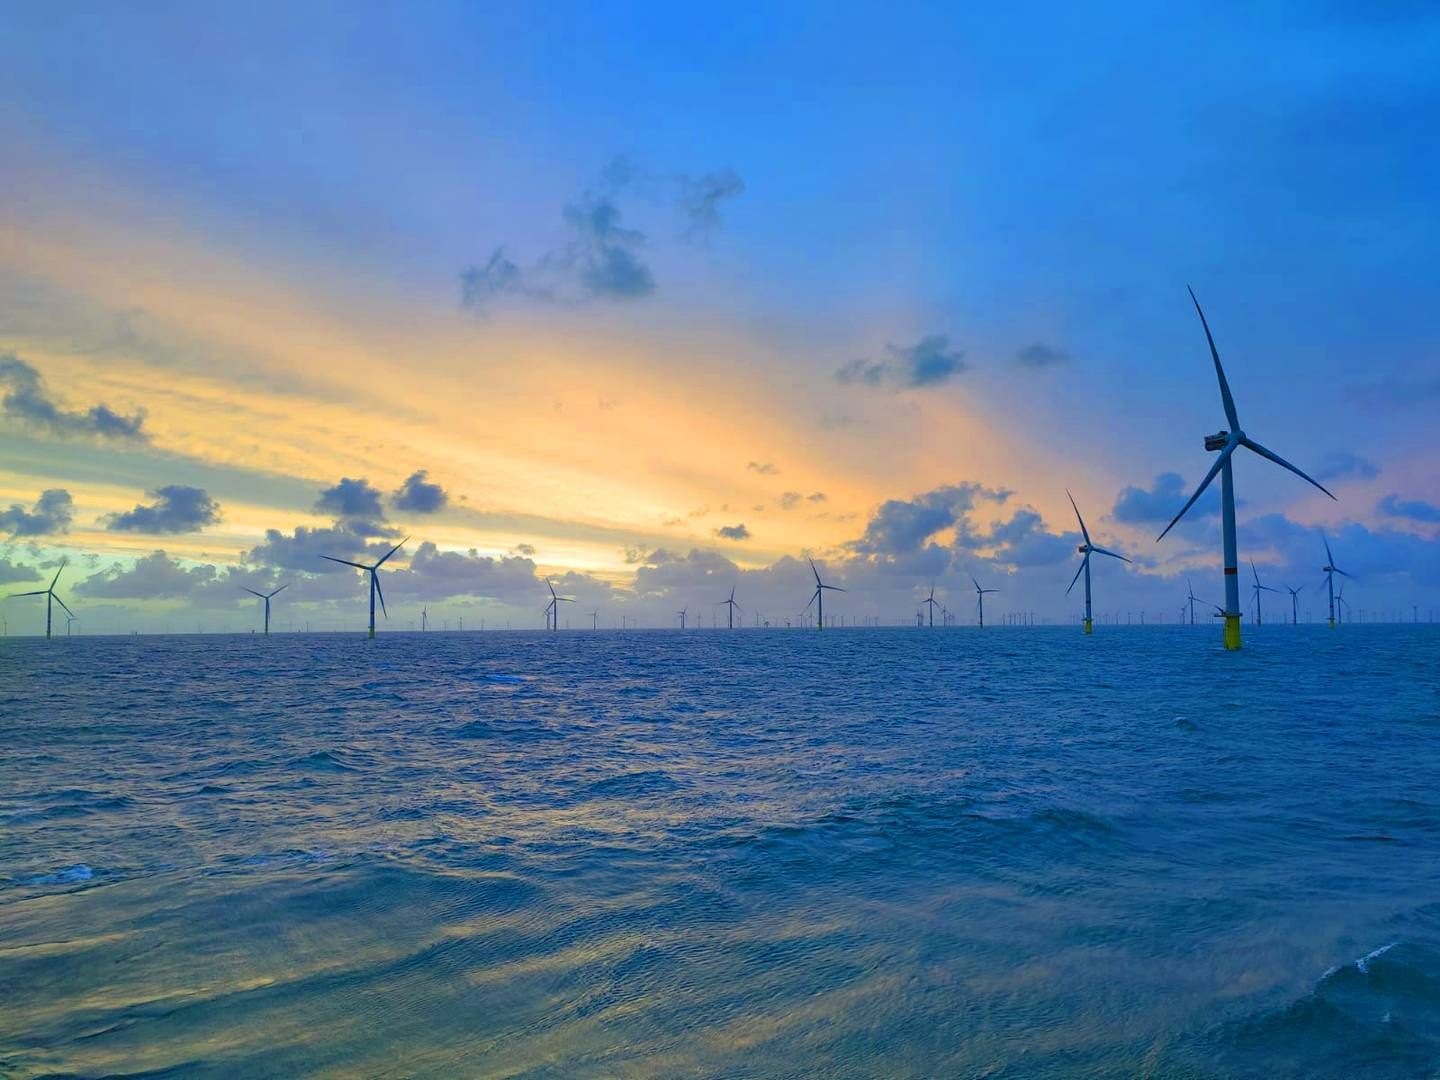 Ocean Winds, alongside an old partner, will bid for 1 GW in an upcoming French offshore wind tender. | Photo: Ocean Winds